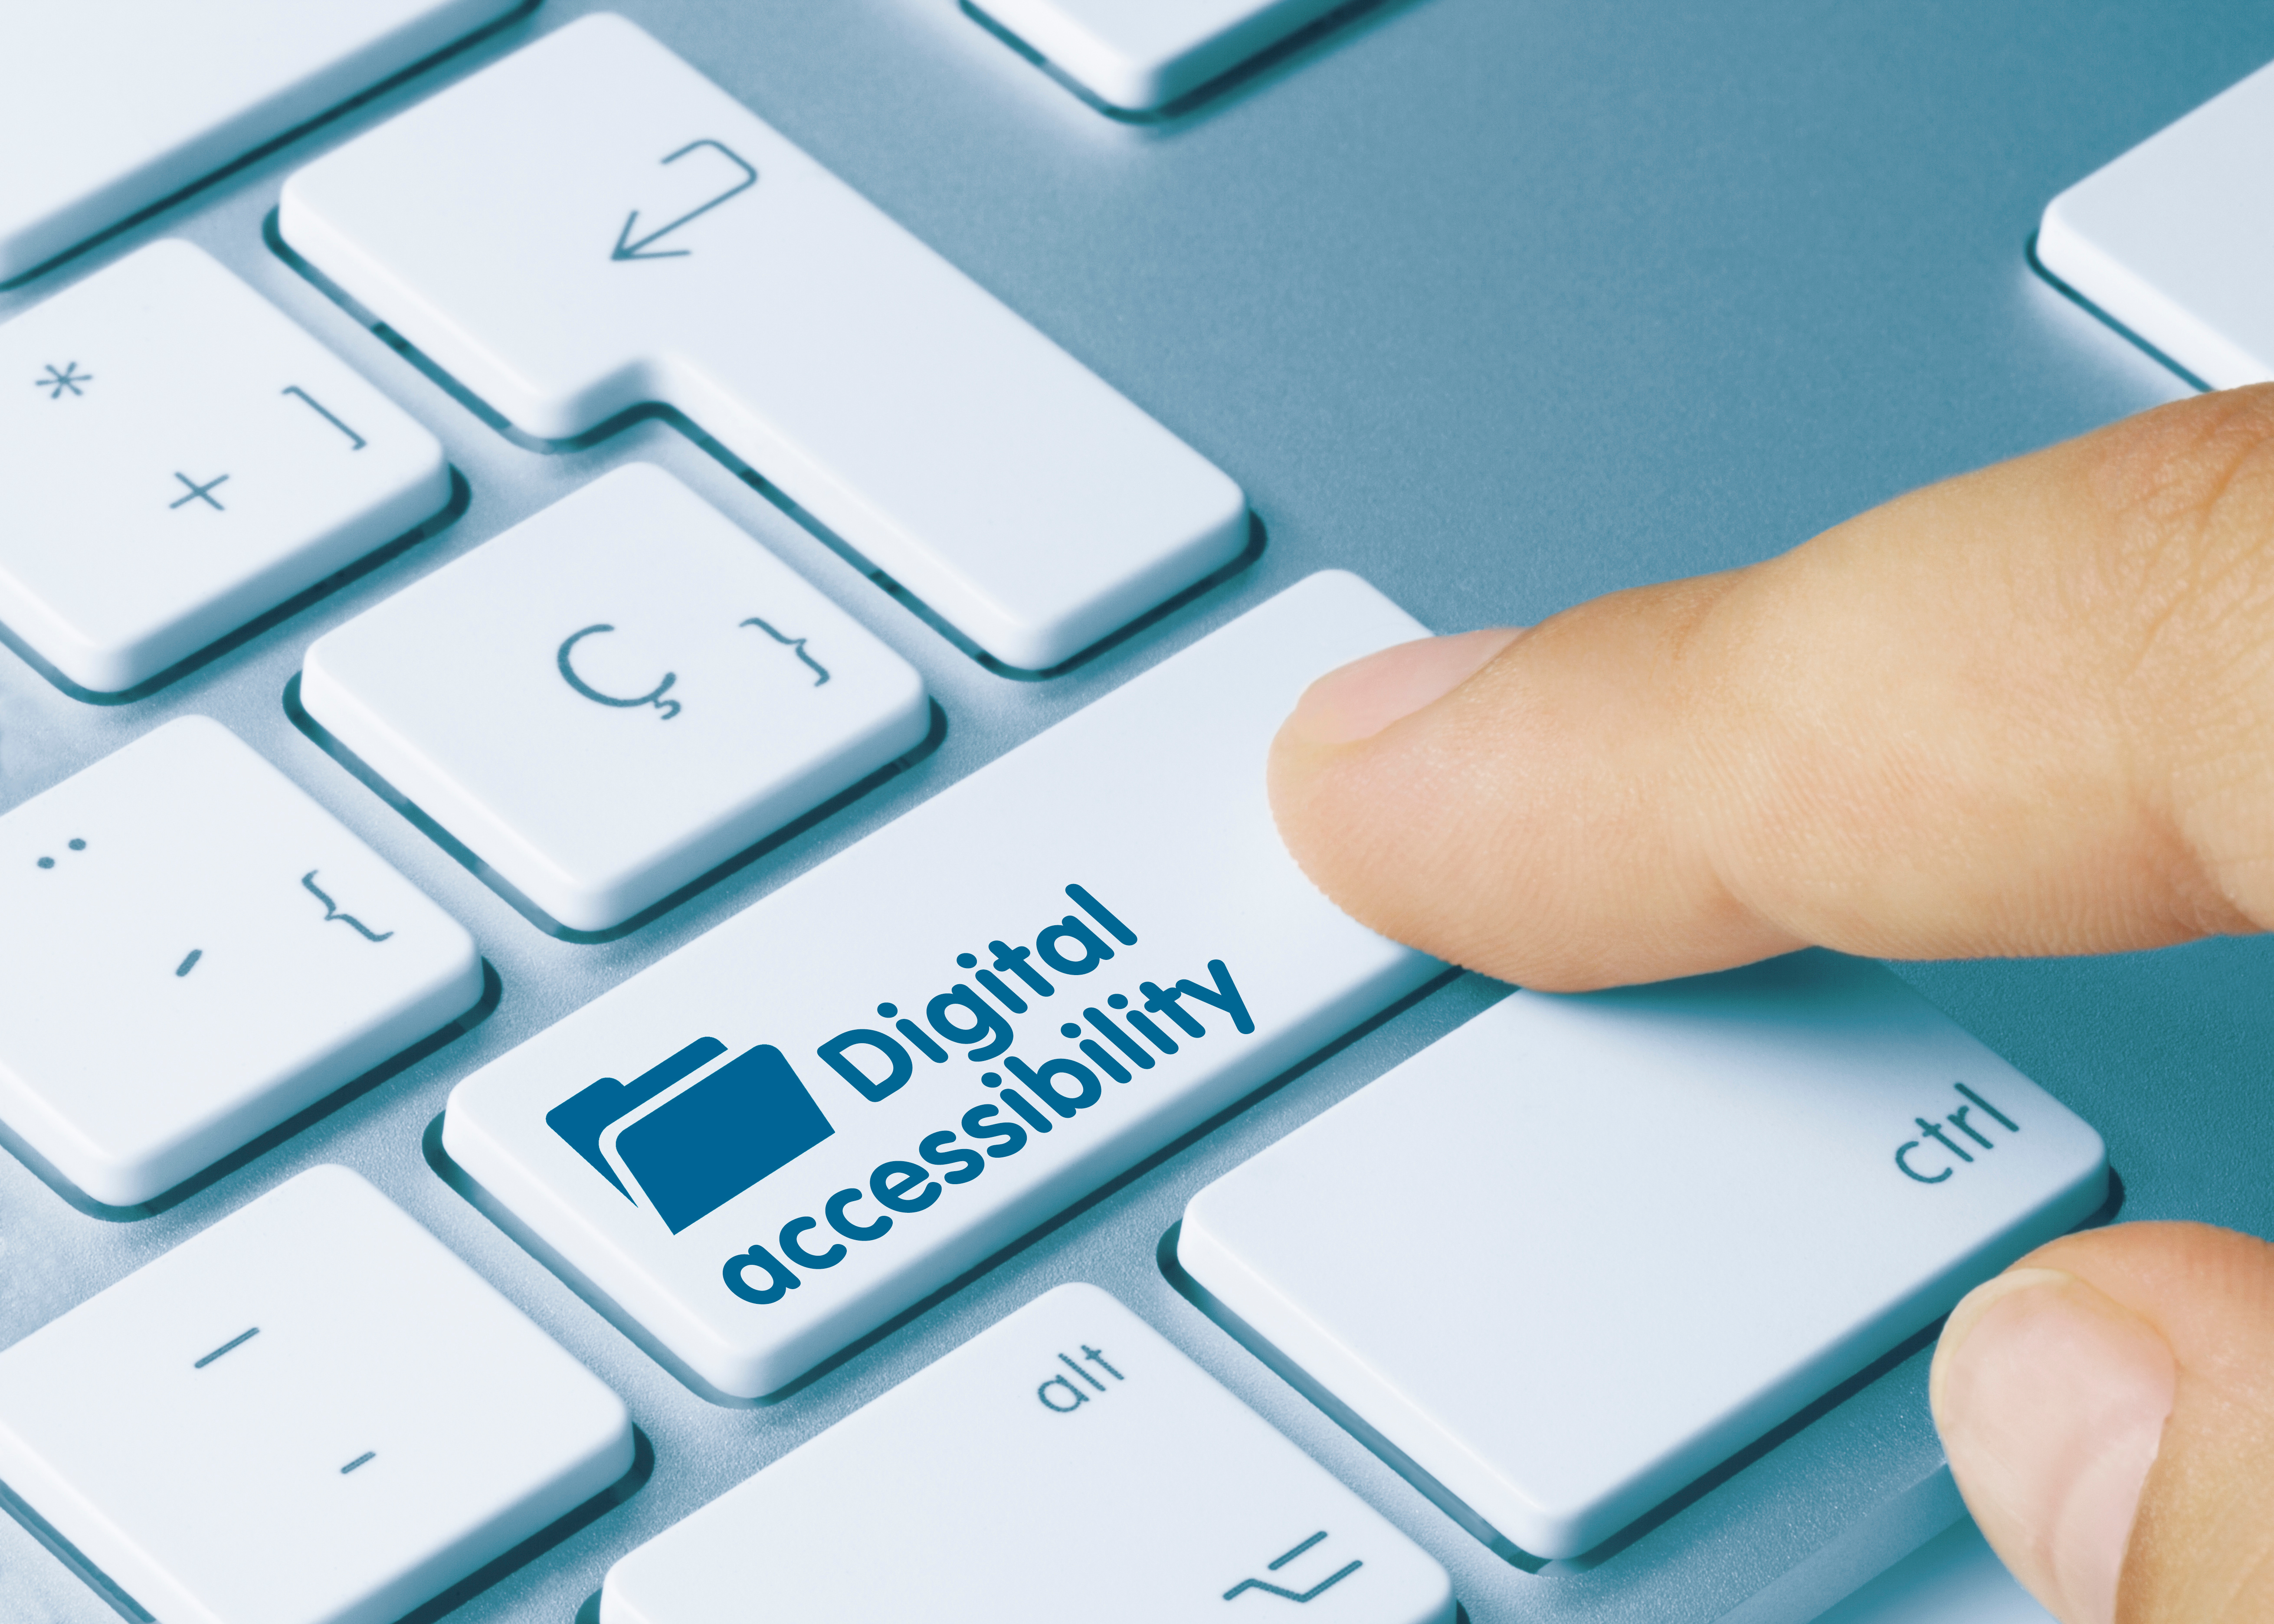 A button on the keyboard labeled "Digital Accessibility".